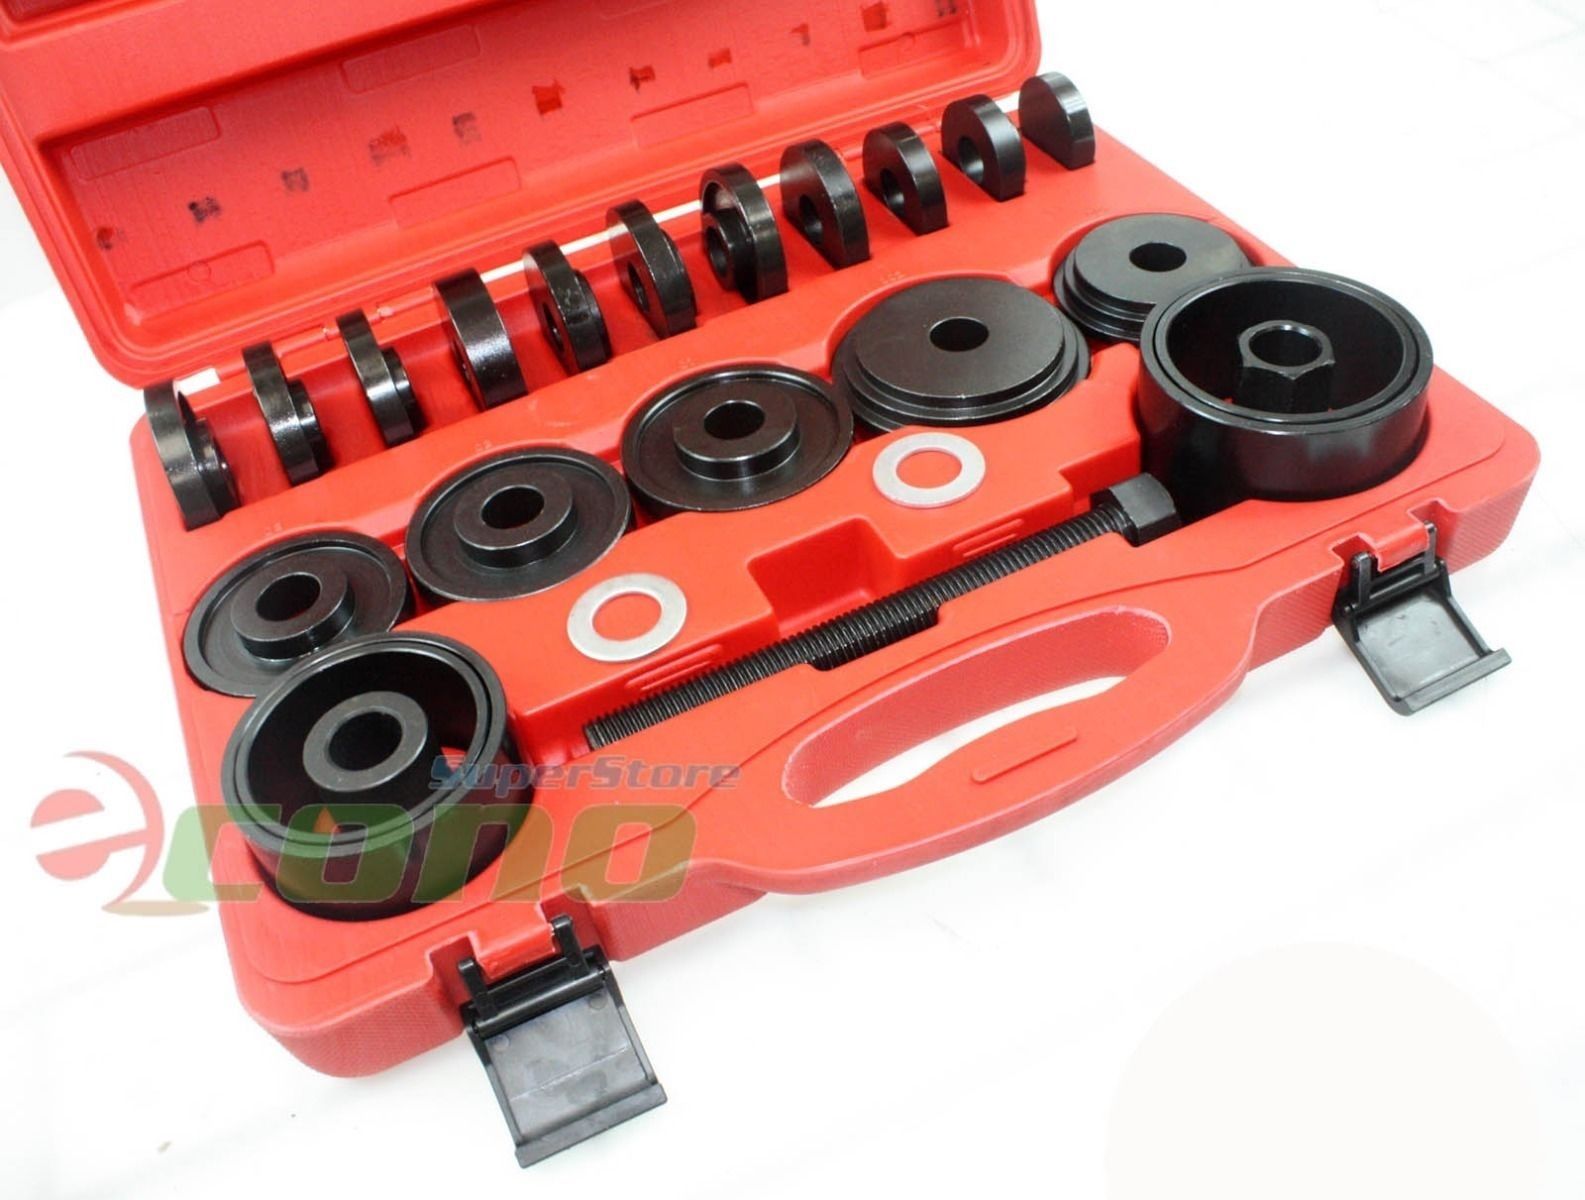 23 PCs Front Wheel Drive Bearing Removal Adapter Puller Pulley Tool Kit W/Case 